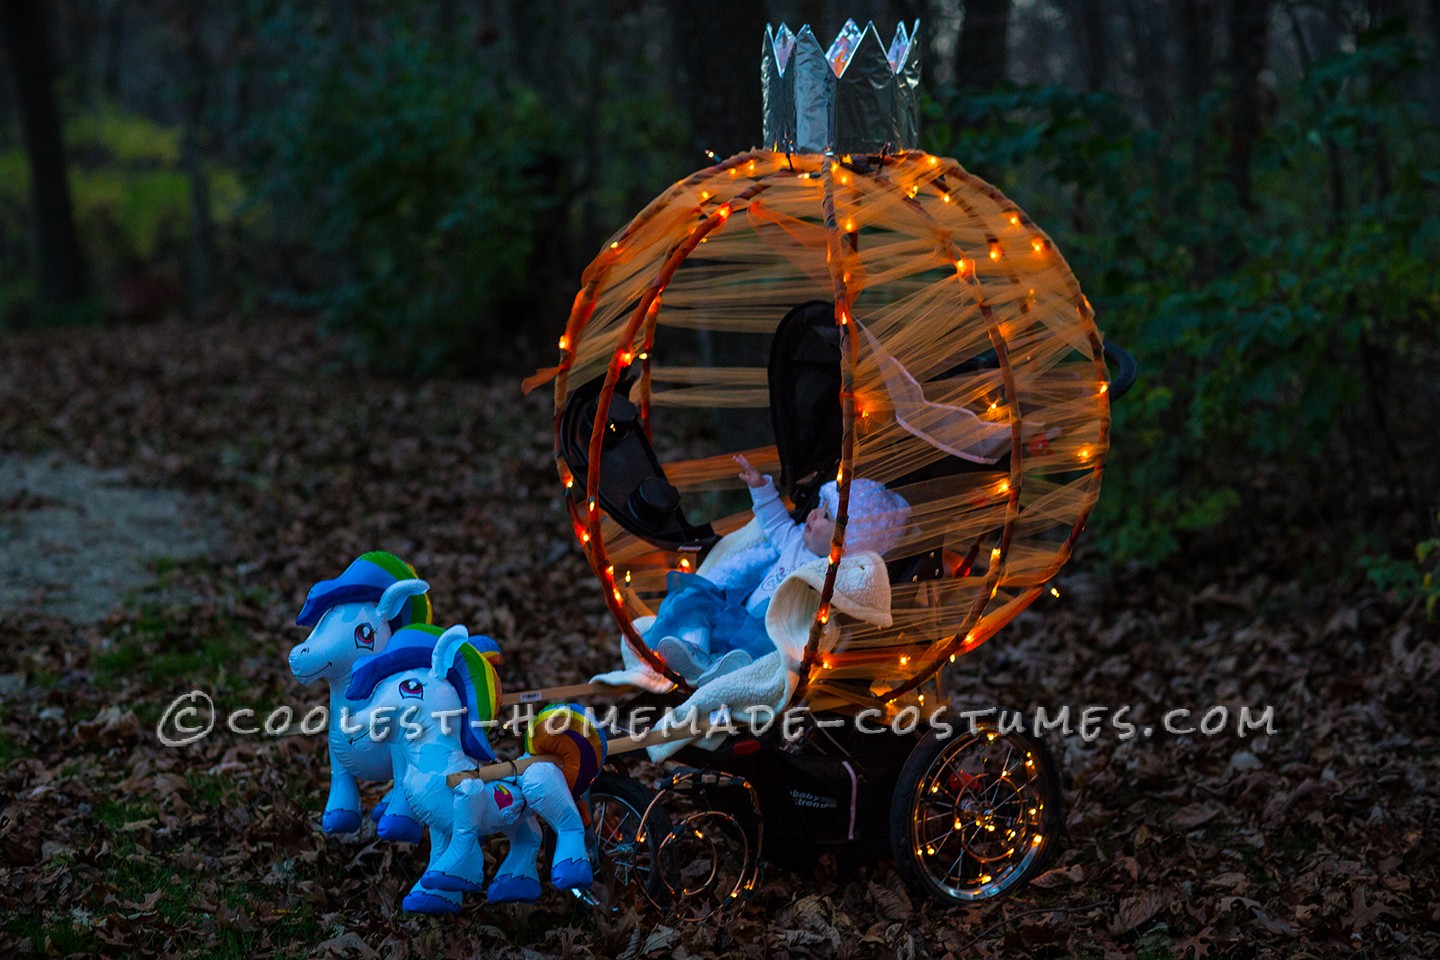 Infant Cinderella and Pumpkin Carriage